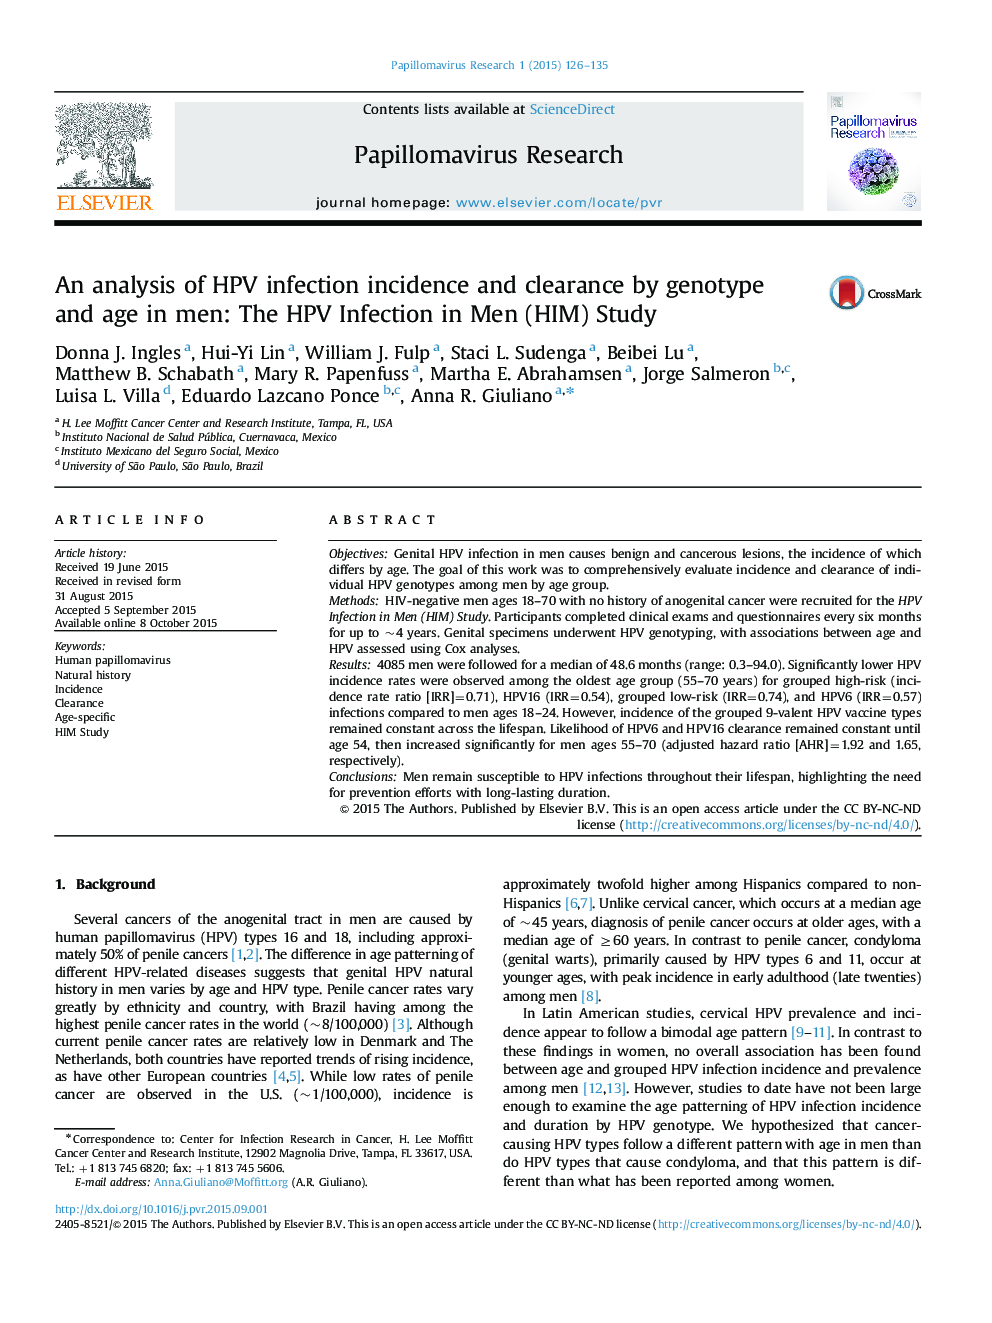 An analysis of HPV infection incidence and clearance by genotype and age in men: The HPV Infection in Men (HIM) Study